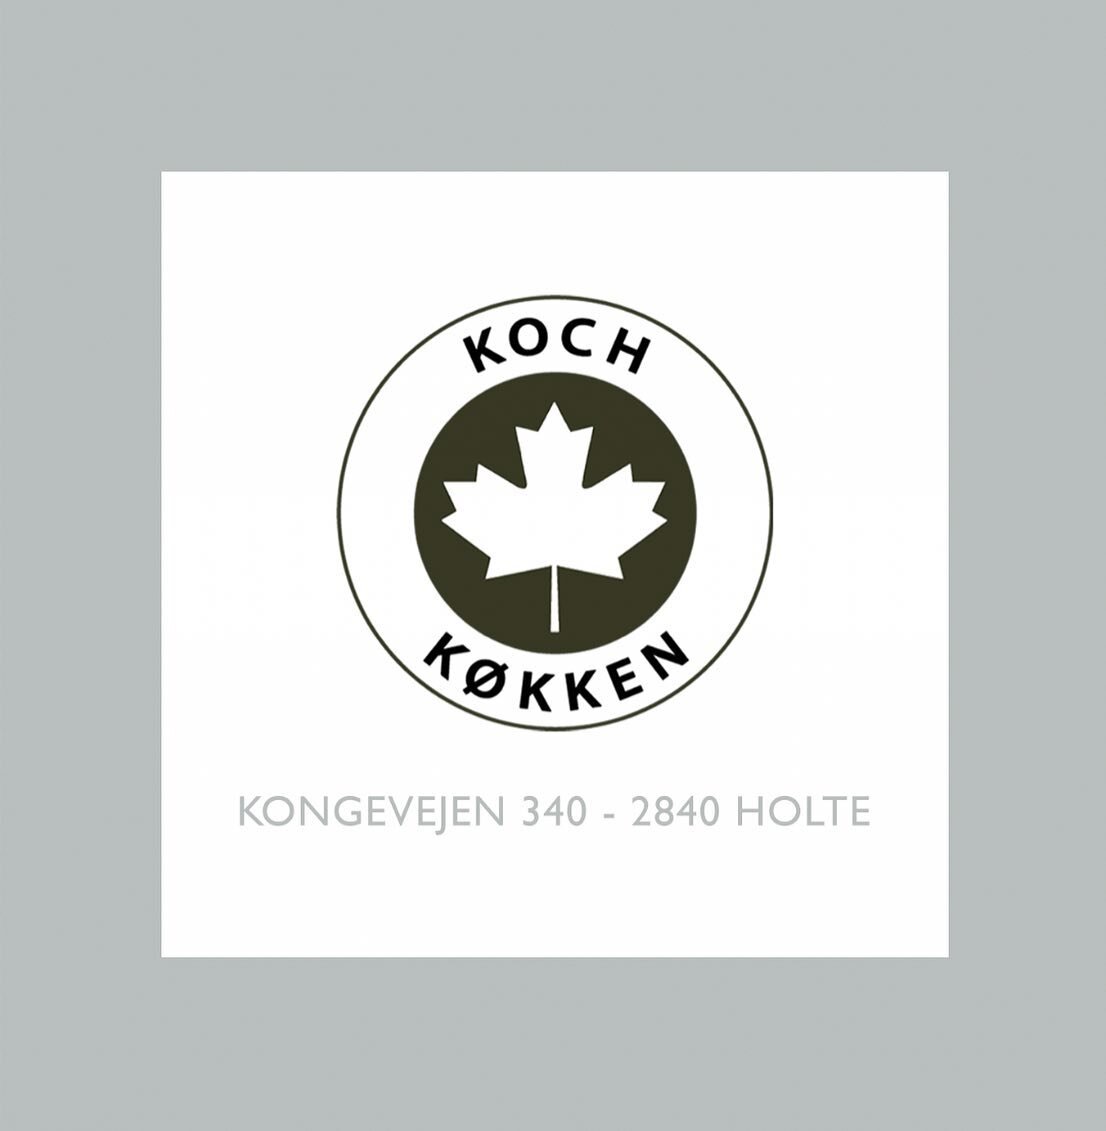 Dear All,

We are beyond excited to share with you a new Koch K&oslash;kken project. We have spent recent times to develop a concept which will launch at our new stunning showroom in 2840 Holte &ndash; Kongevejen 340. Here we will soon be presenting 